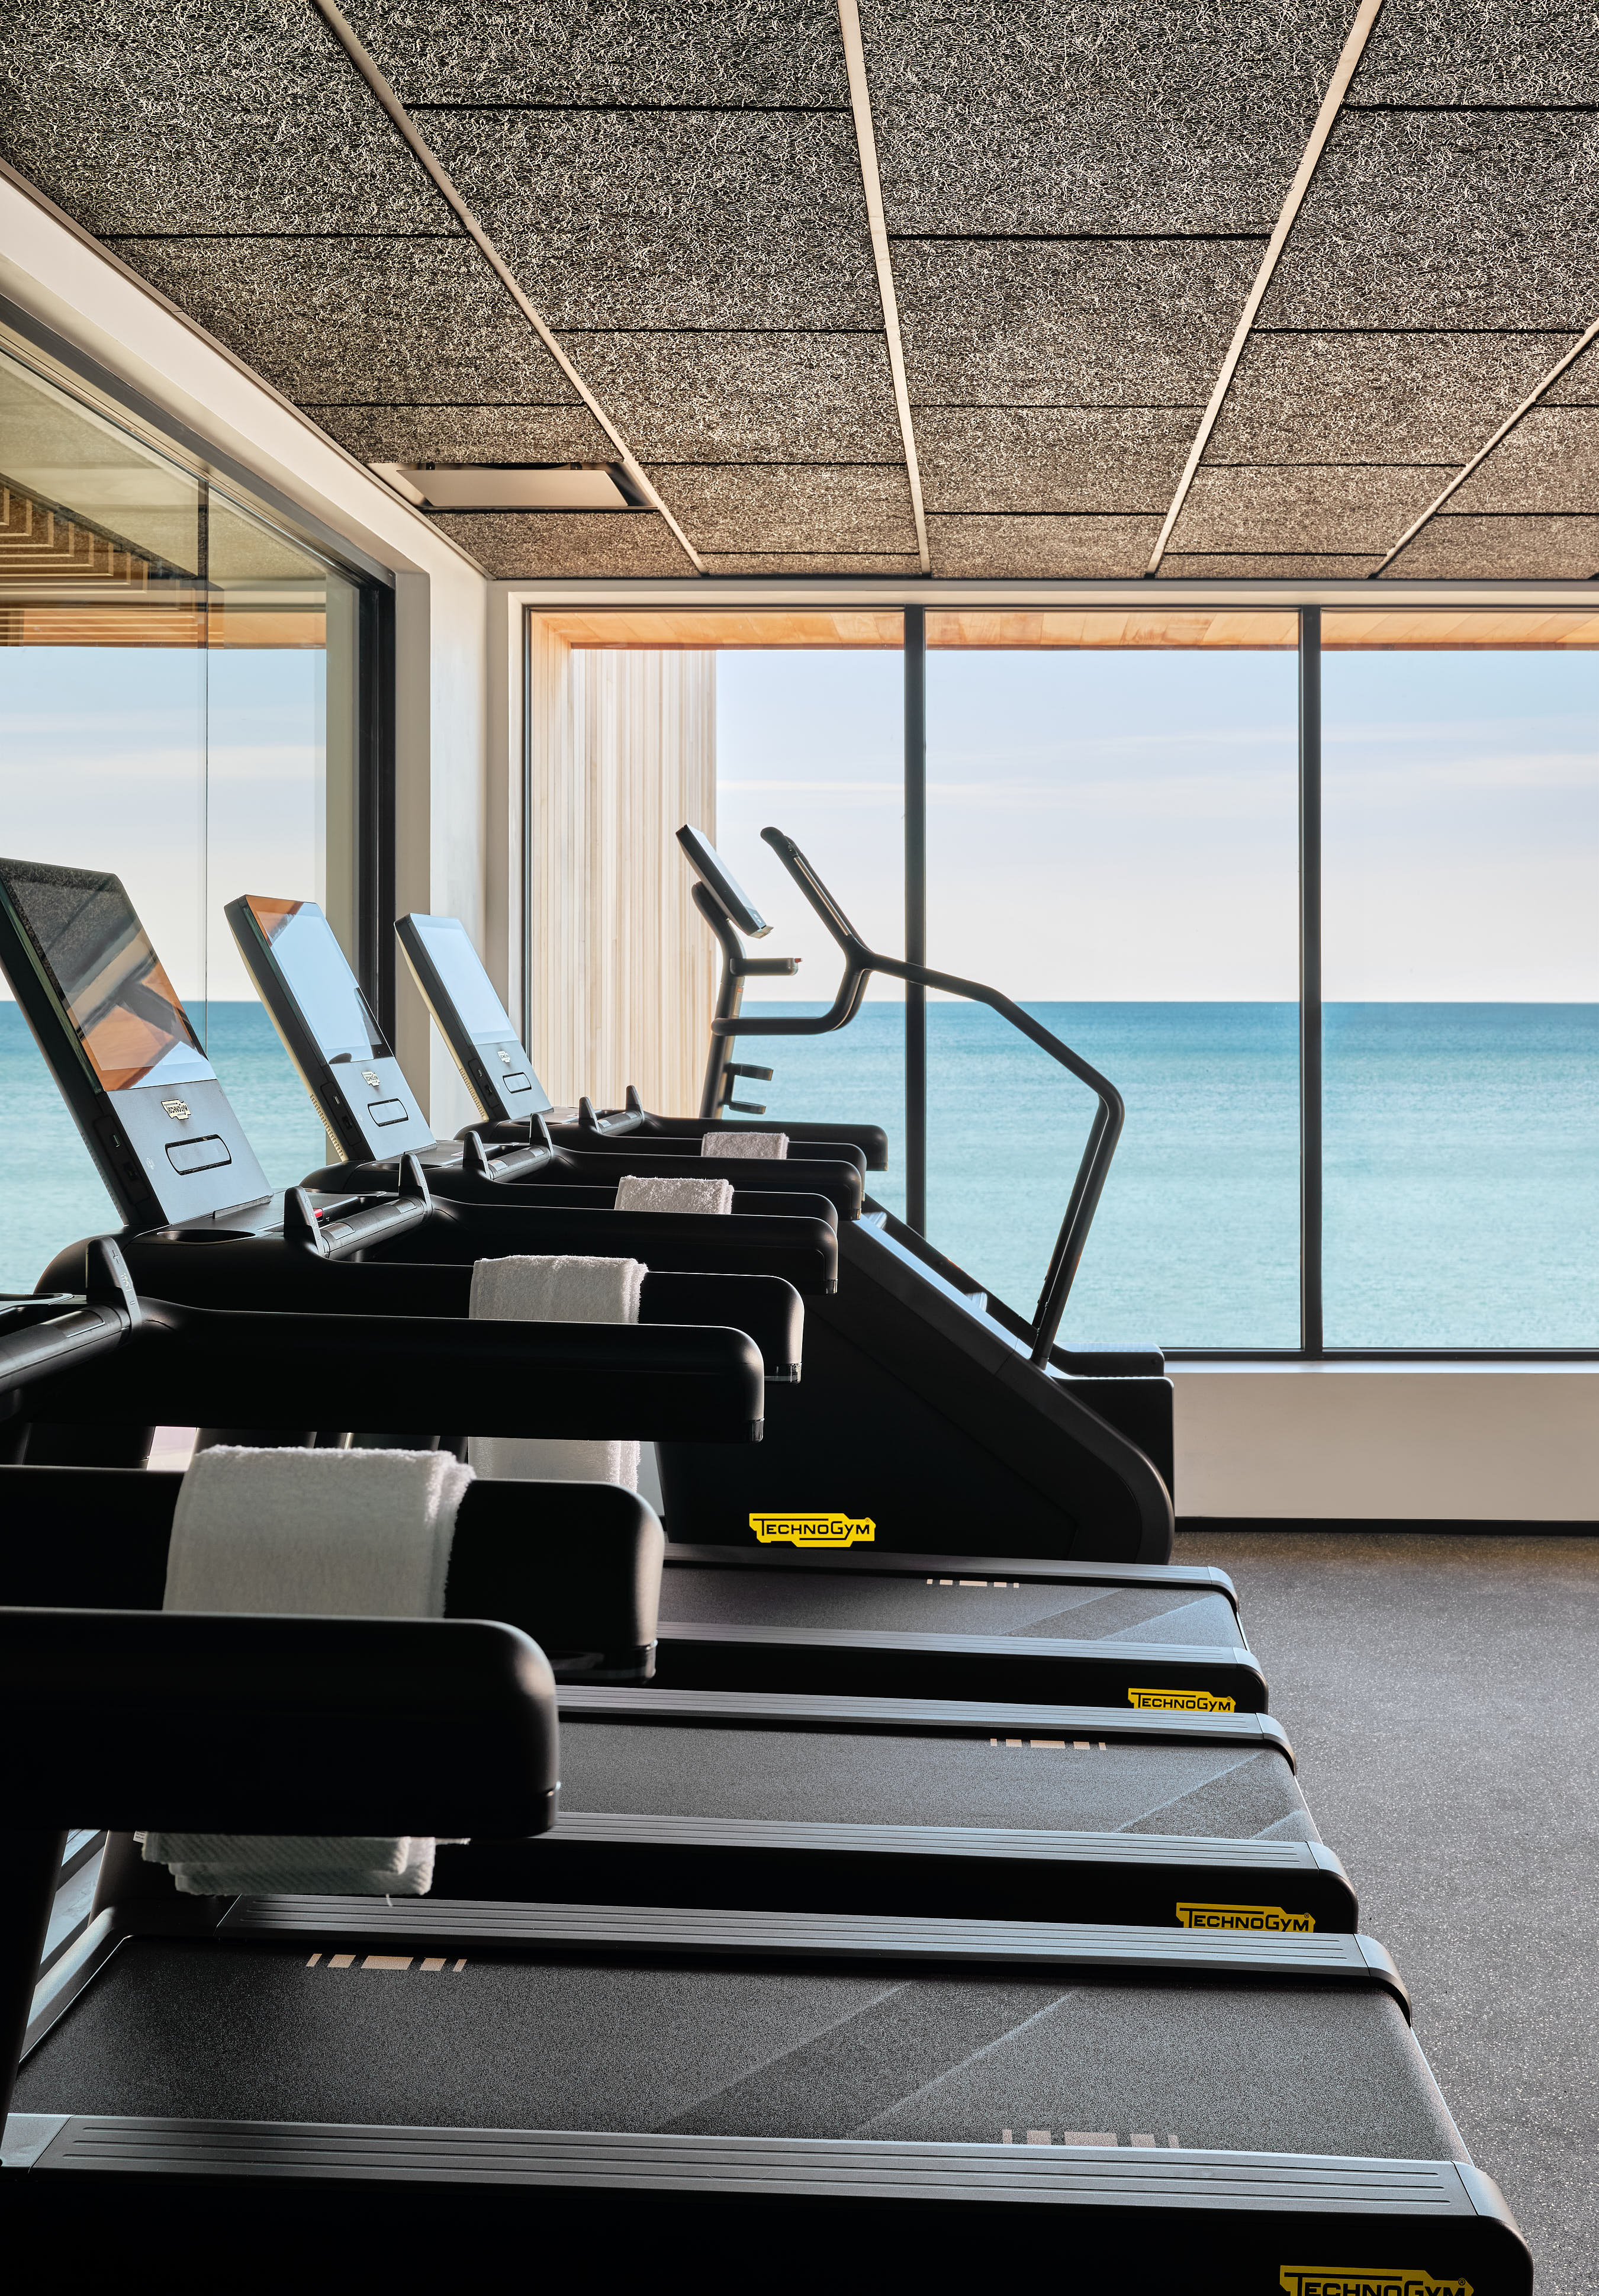 Treadmills and stair stepper with ocean view.